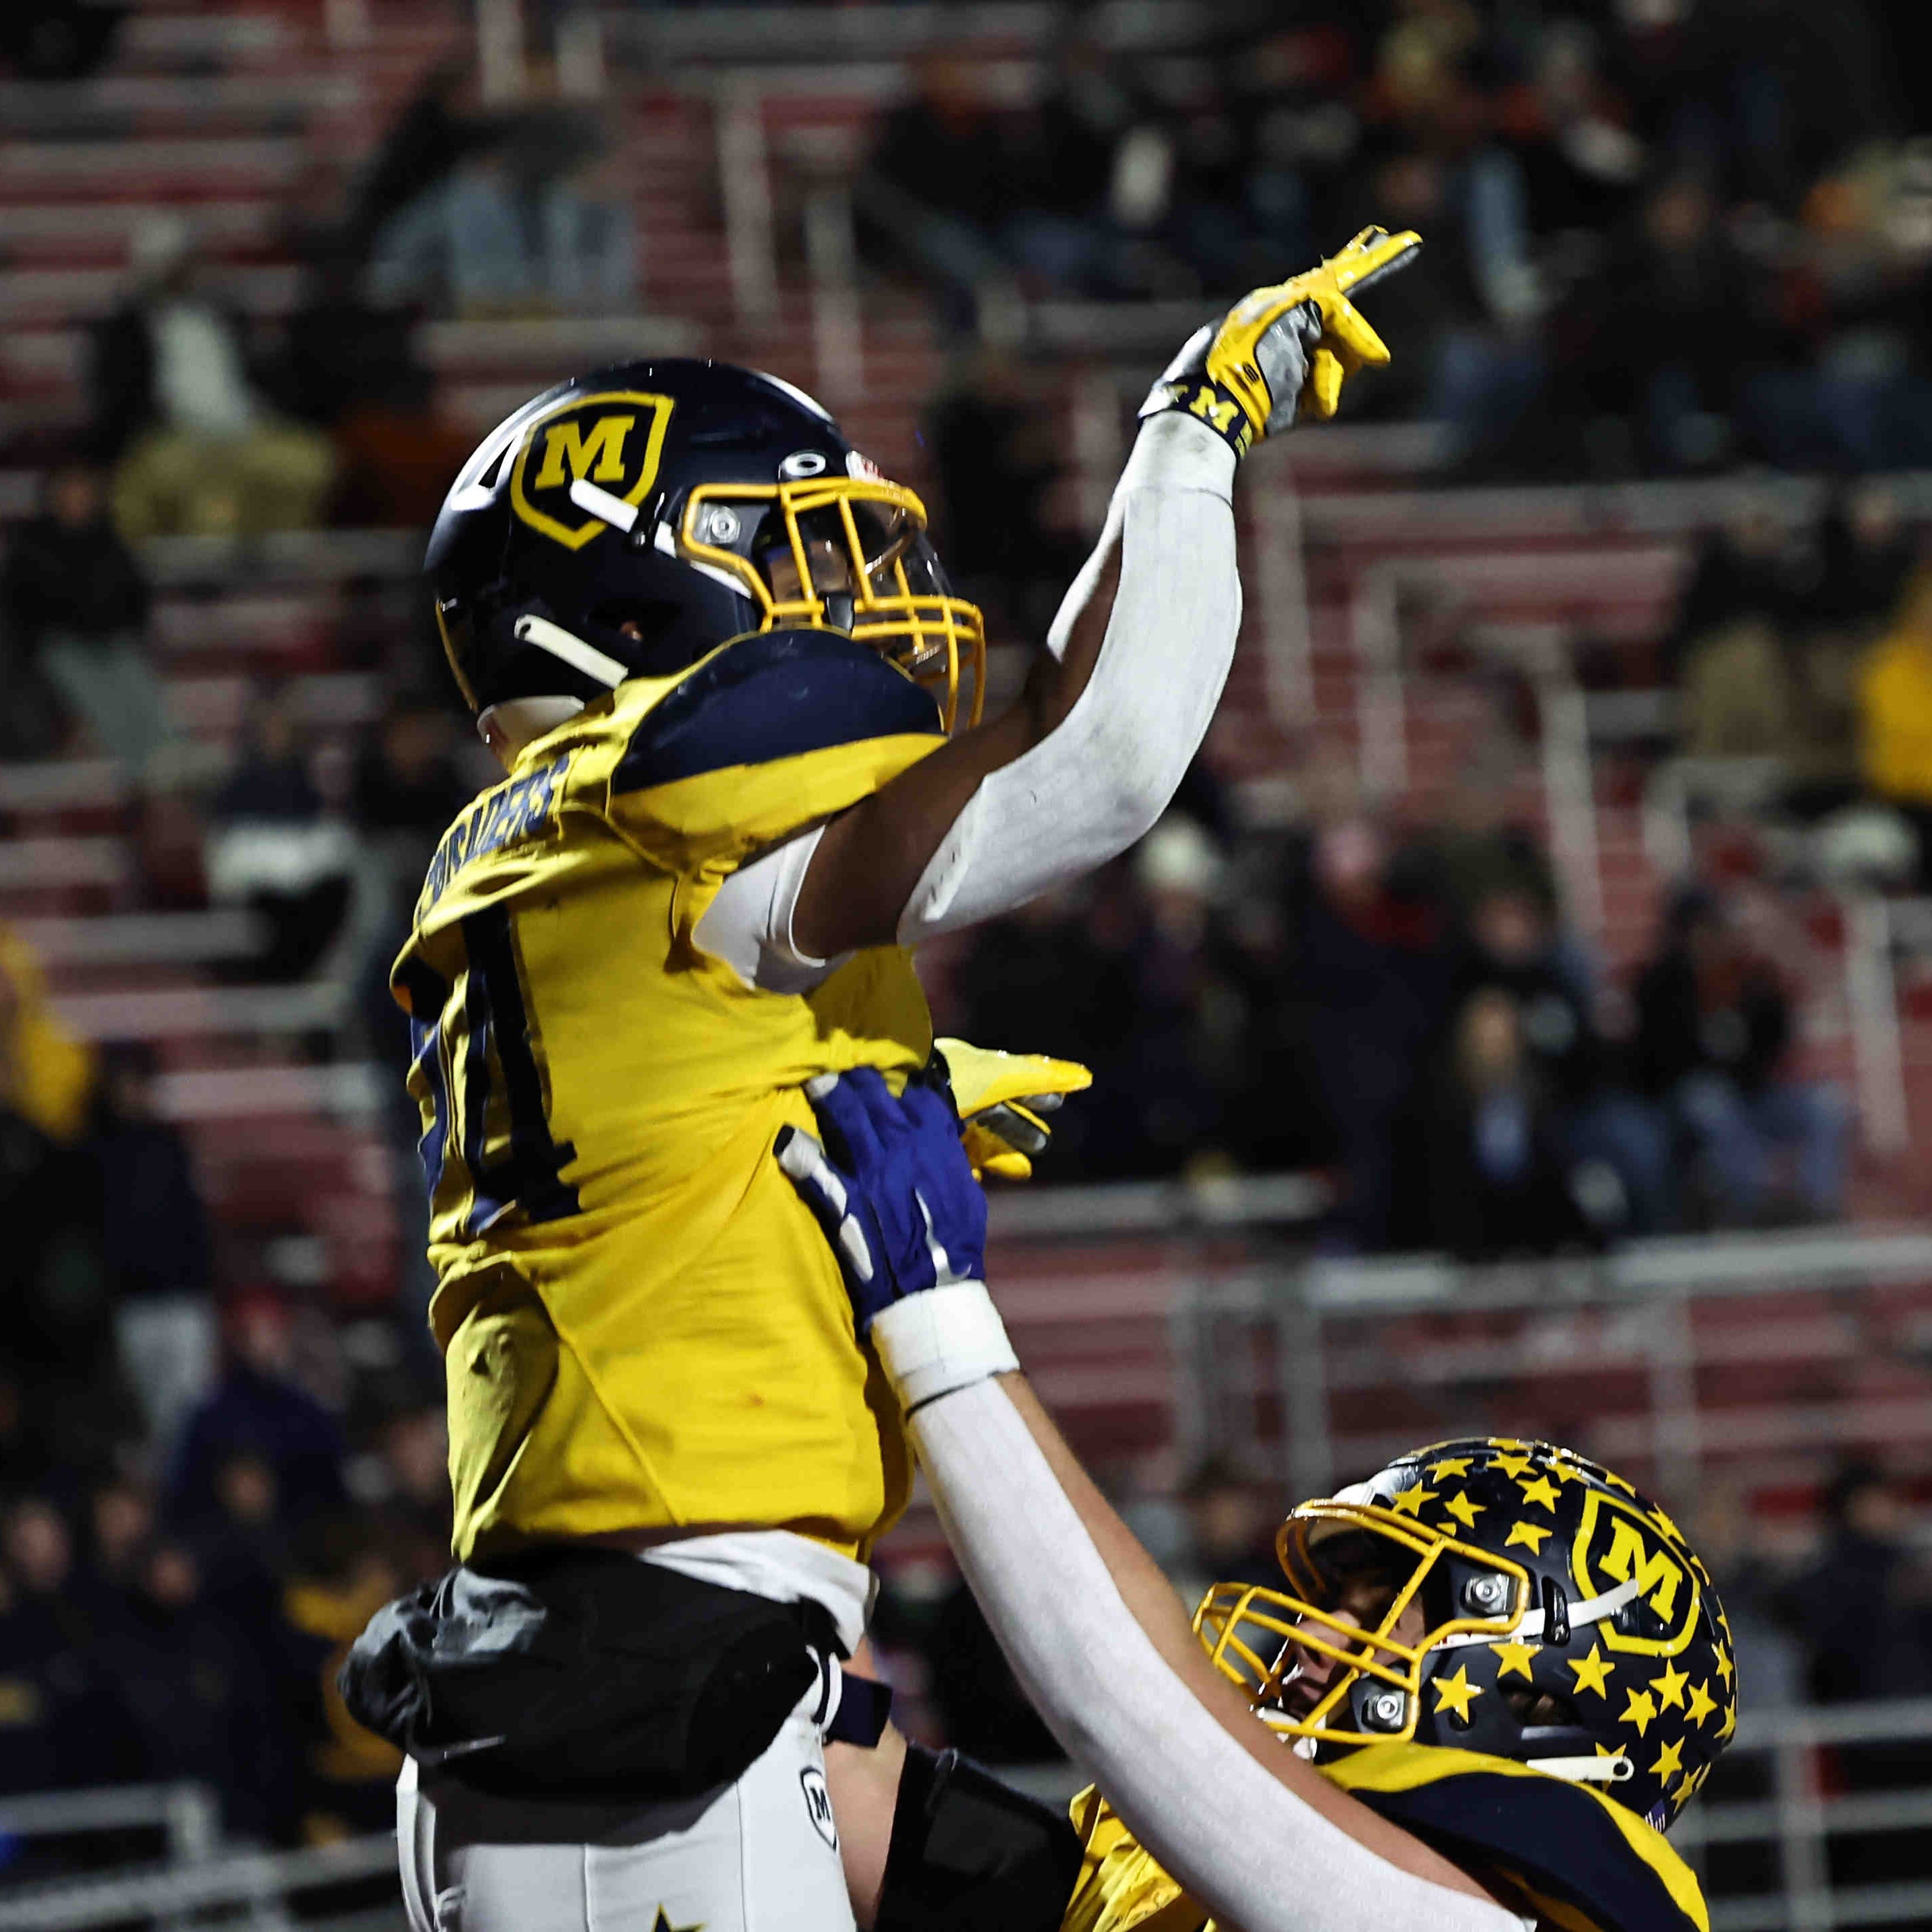 Moeller running back Jordan Marshall celebrates after he scores a touchdown during the Crusaders' state semifinal against Springfield Friday, Nov 25, 2022.